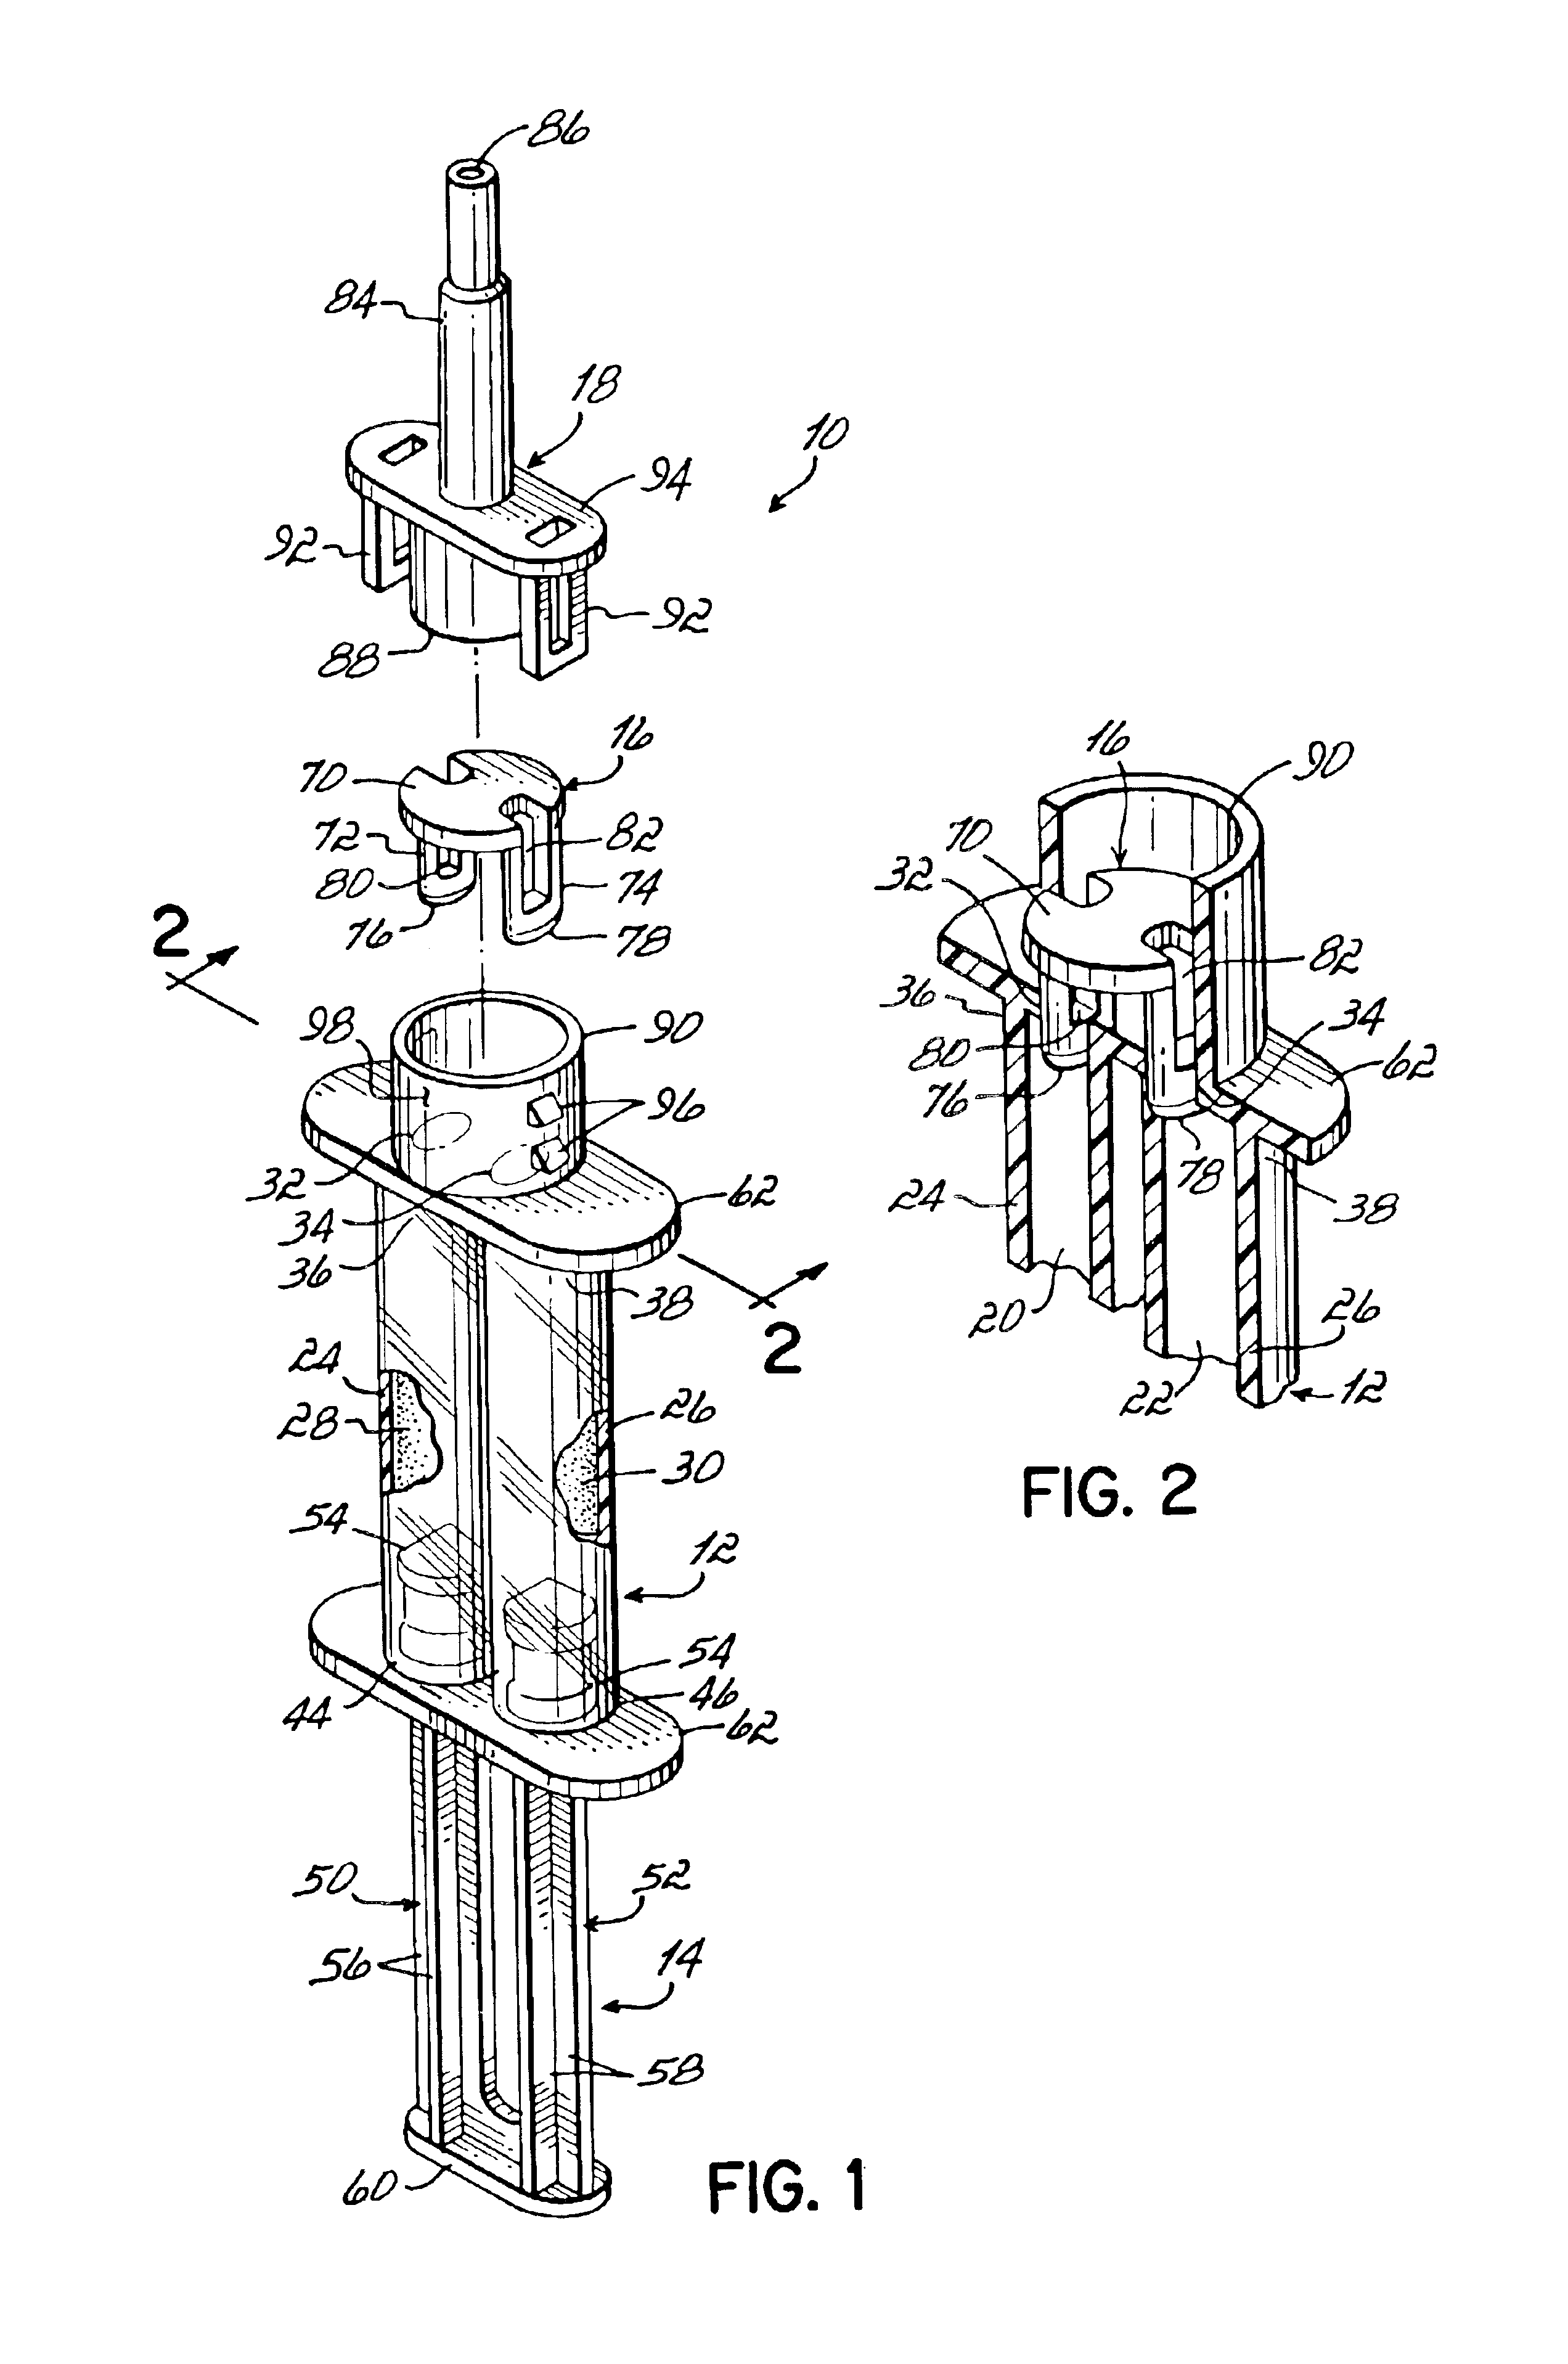 Single dose dental impression material delivery system and method